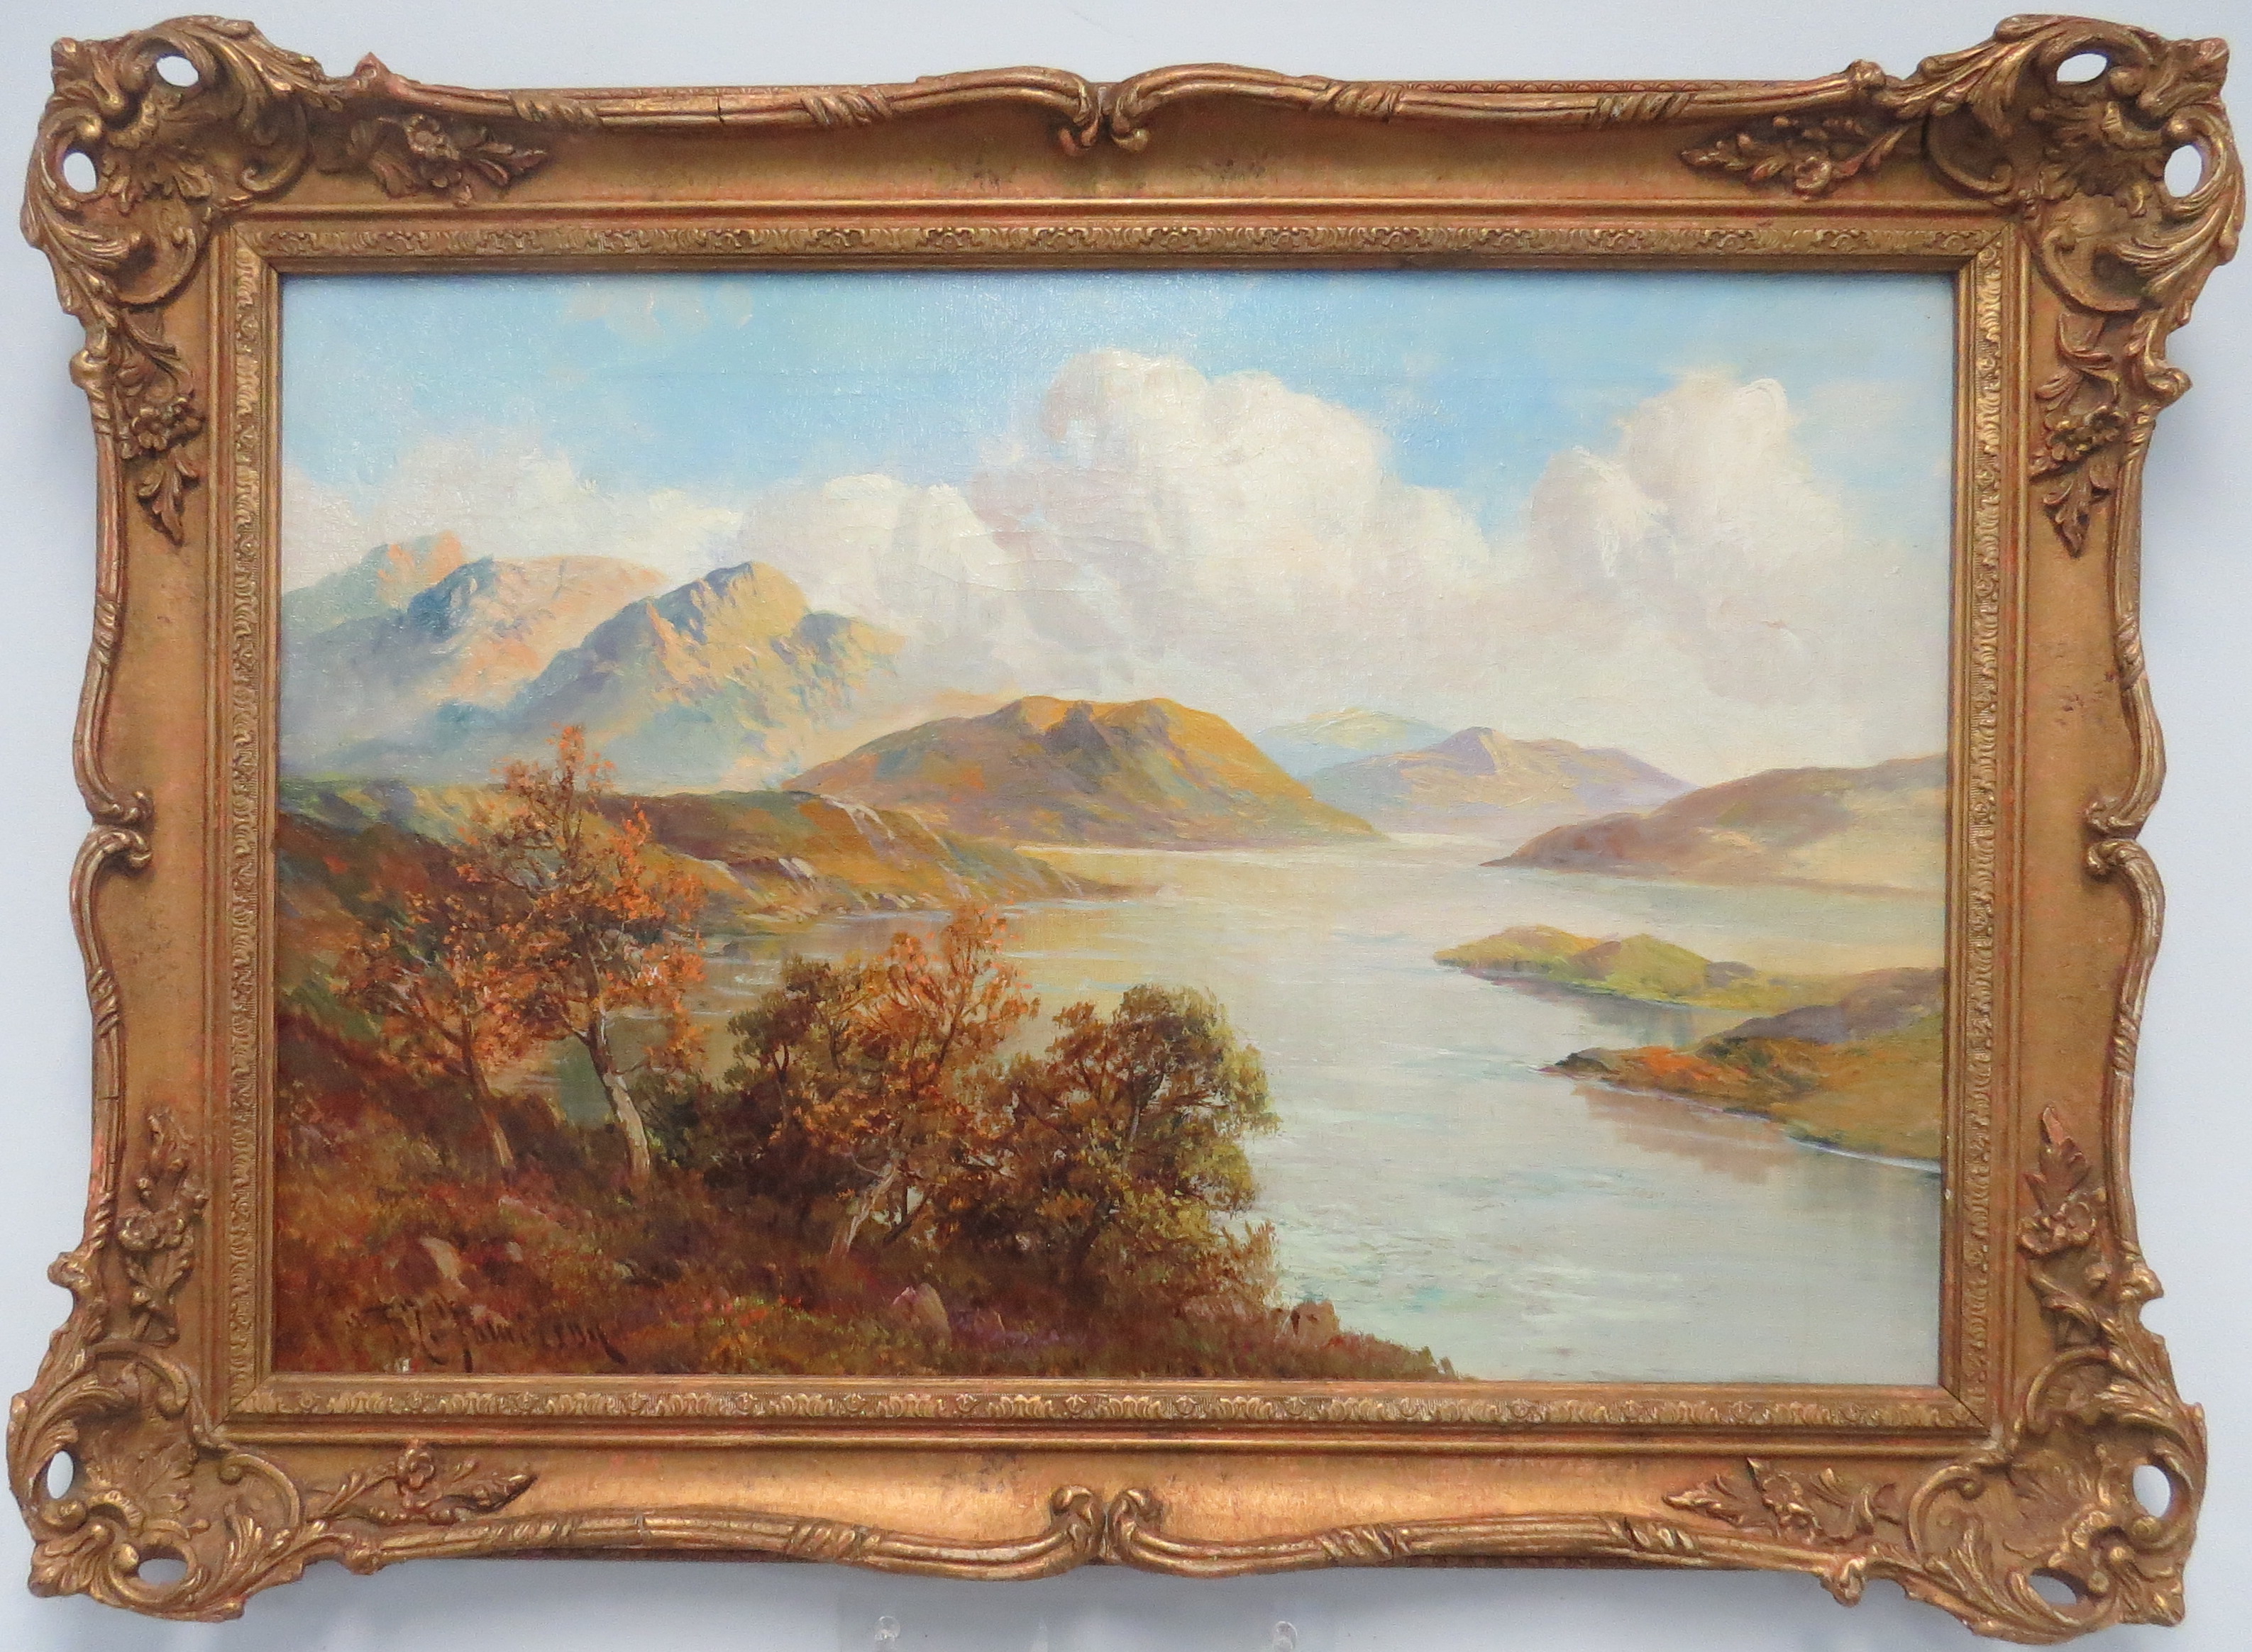 Oil on Canvas of an English Landscape, signed F.E. Jamison (1870)